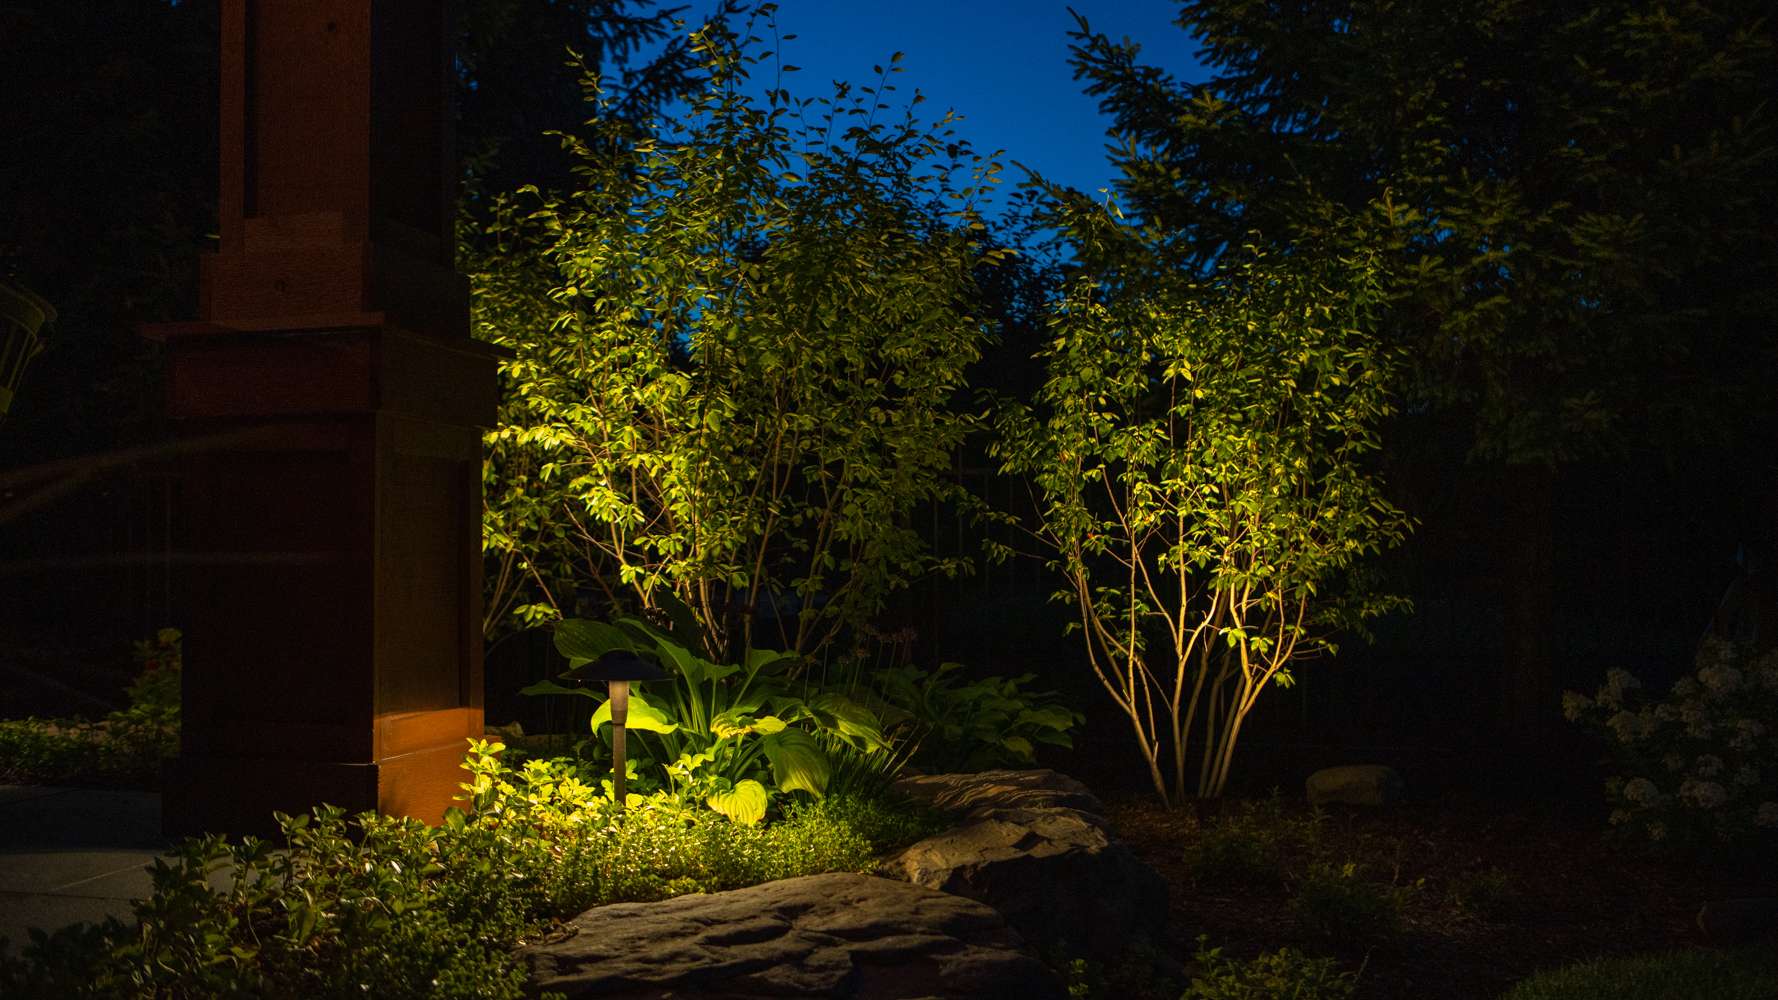 5 Landscape Lighting Ideas for Trees: How to Illuminate Your Trees